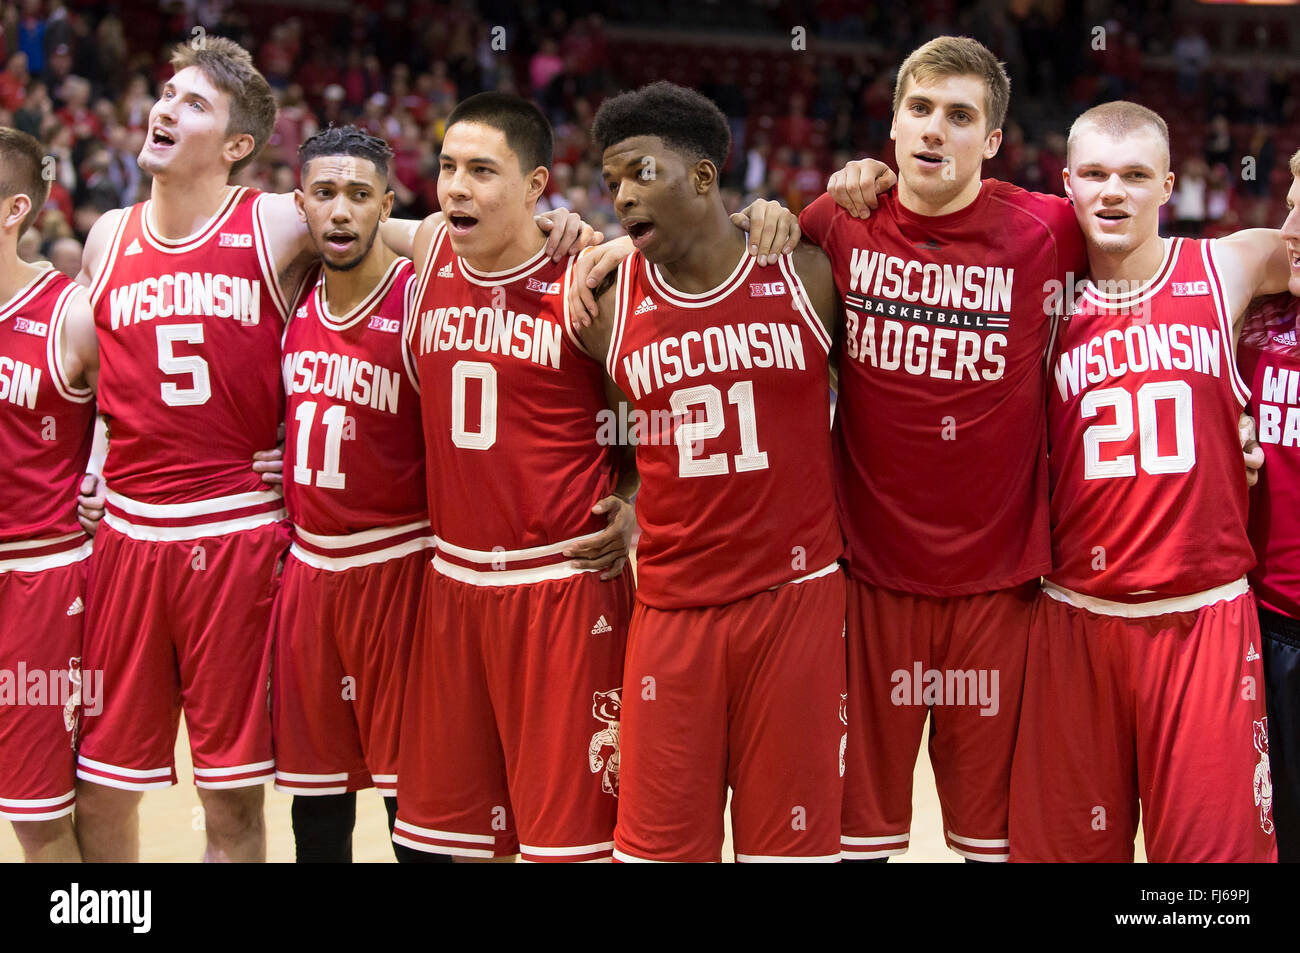 Madison, WI, USA. 28th Feb, 2016. Wisconsin players sing Varsity after the NCAA Basketball game between the Michigan Wolverines and the Wisconsin Badgers at the Kohl Center in Madison, WI. Wisconsin defeated Michigan 68-57. John Fisher/CSM/Alamy Live News Stock Photo